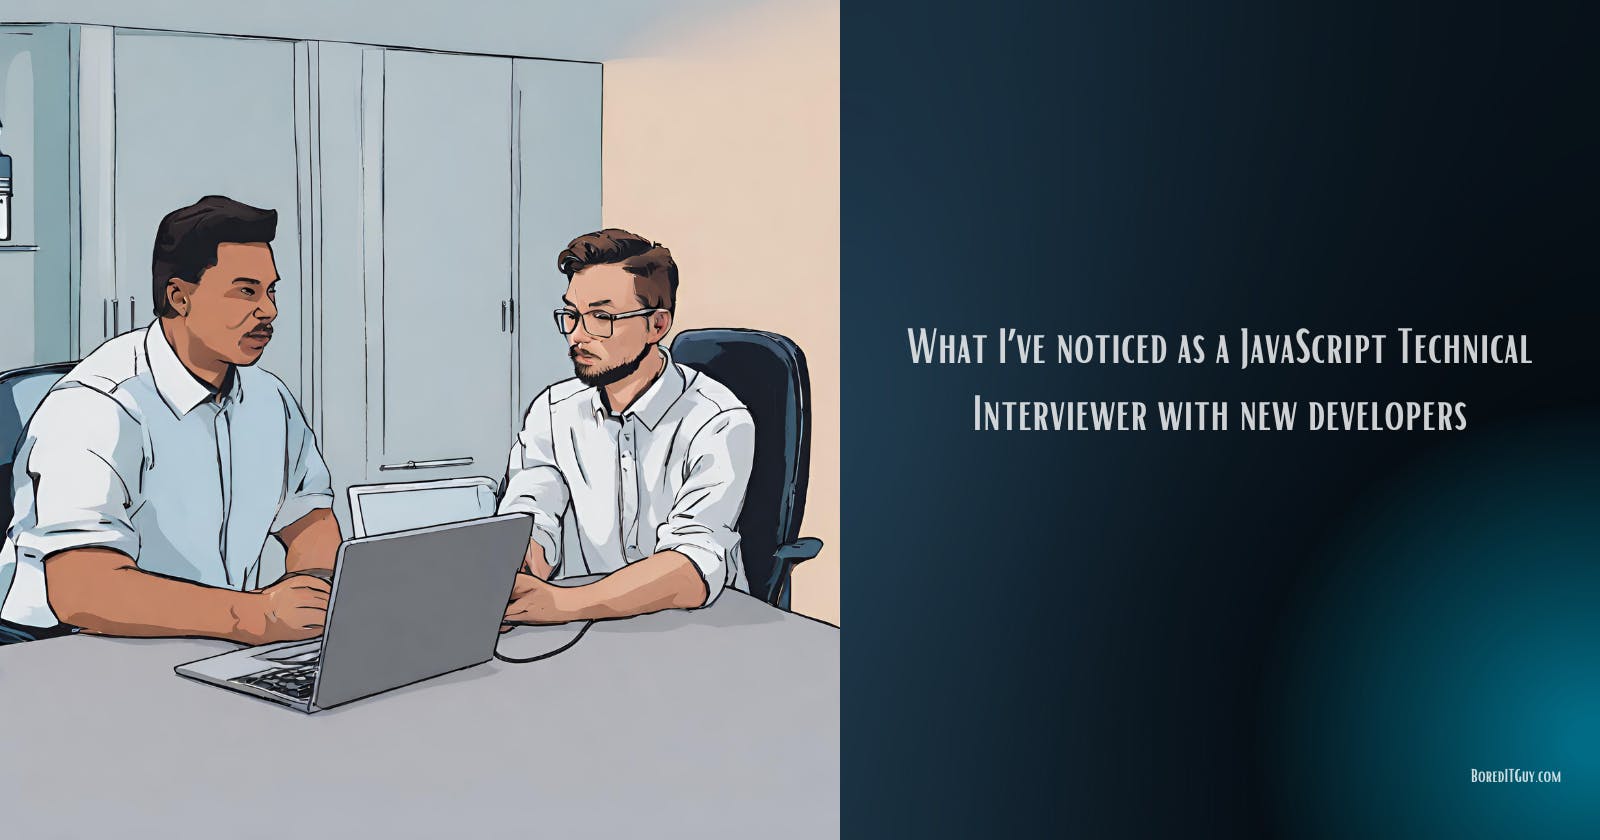 What surprised me as a technical interviewer